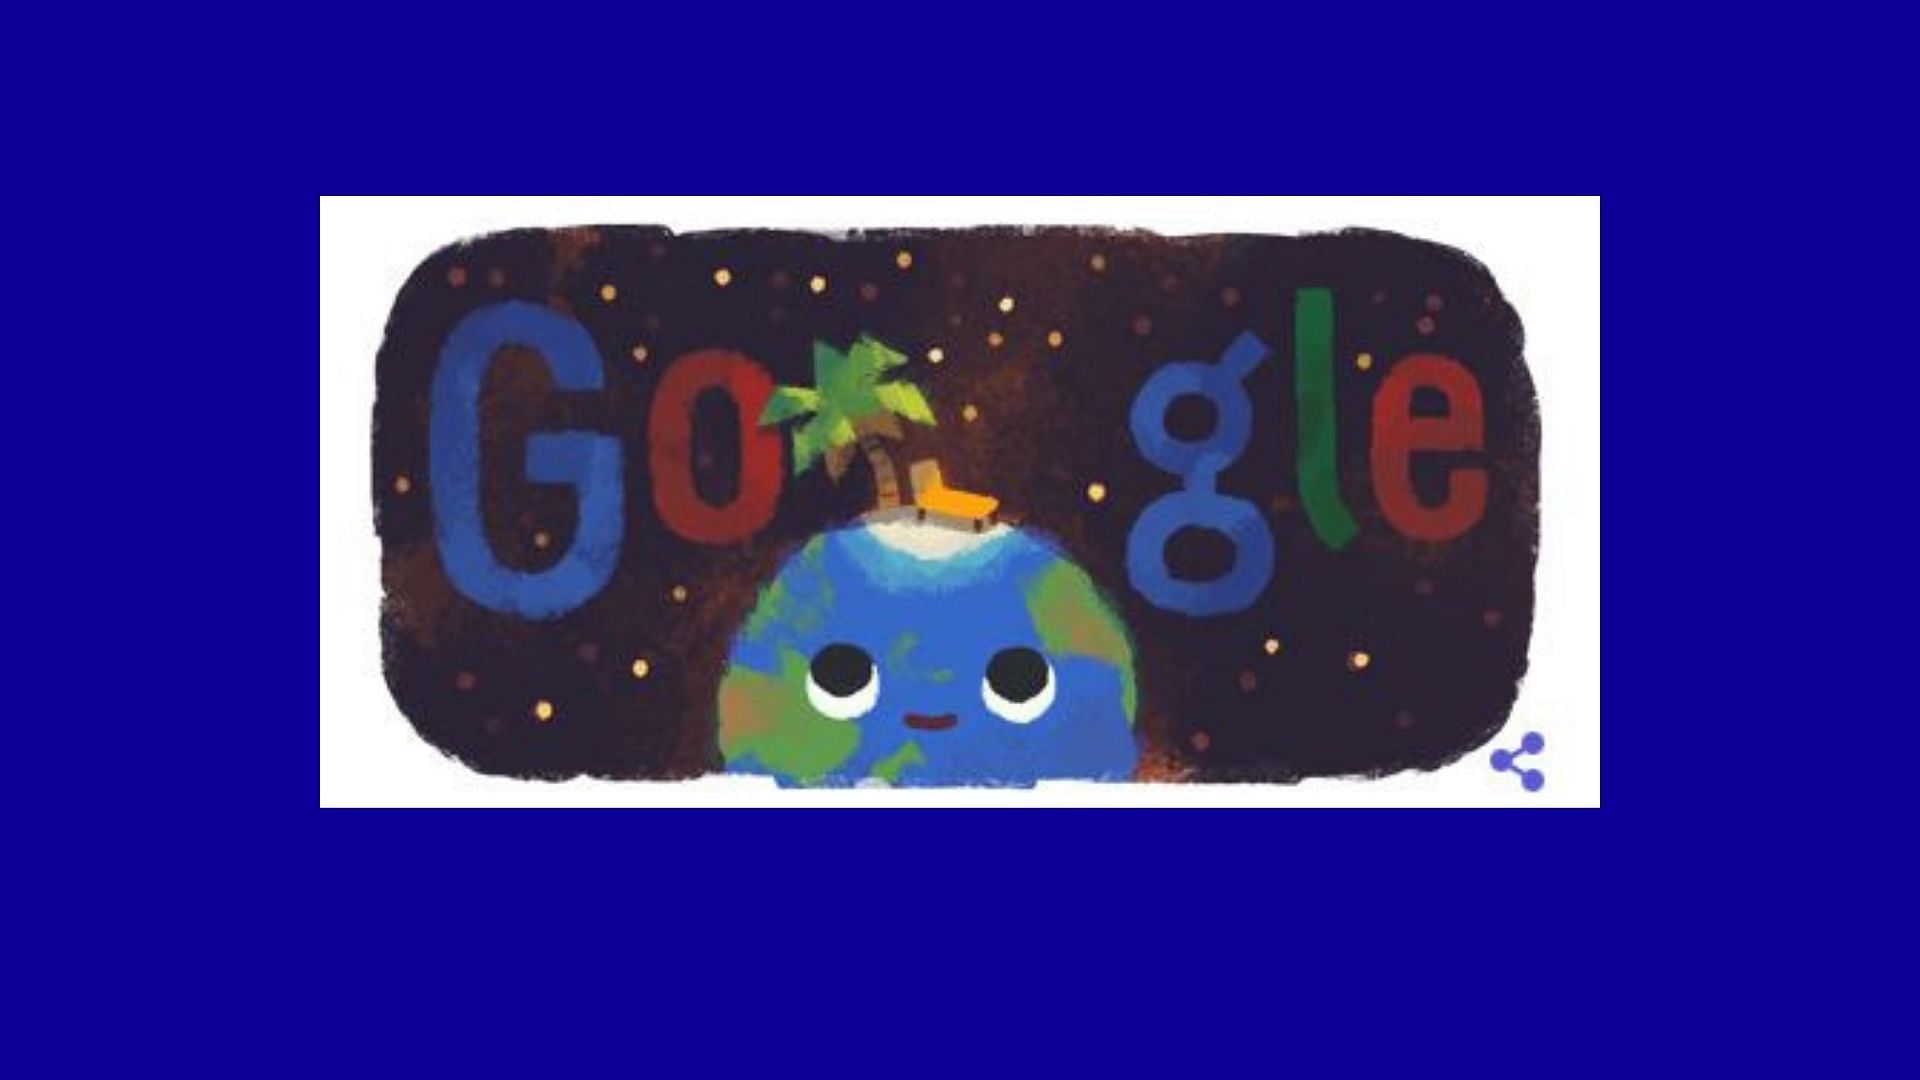 Google celebrated the Summer Solstice with an adorable earth doodle.